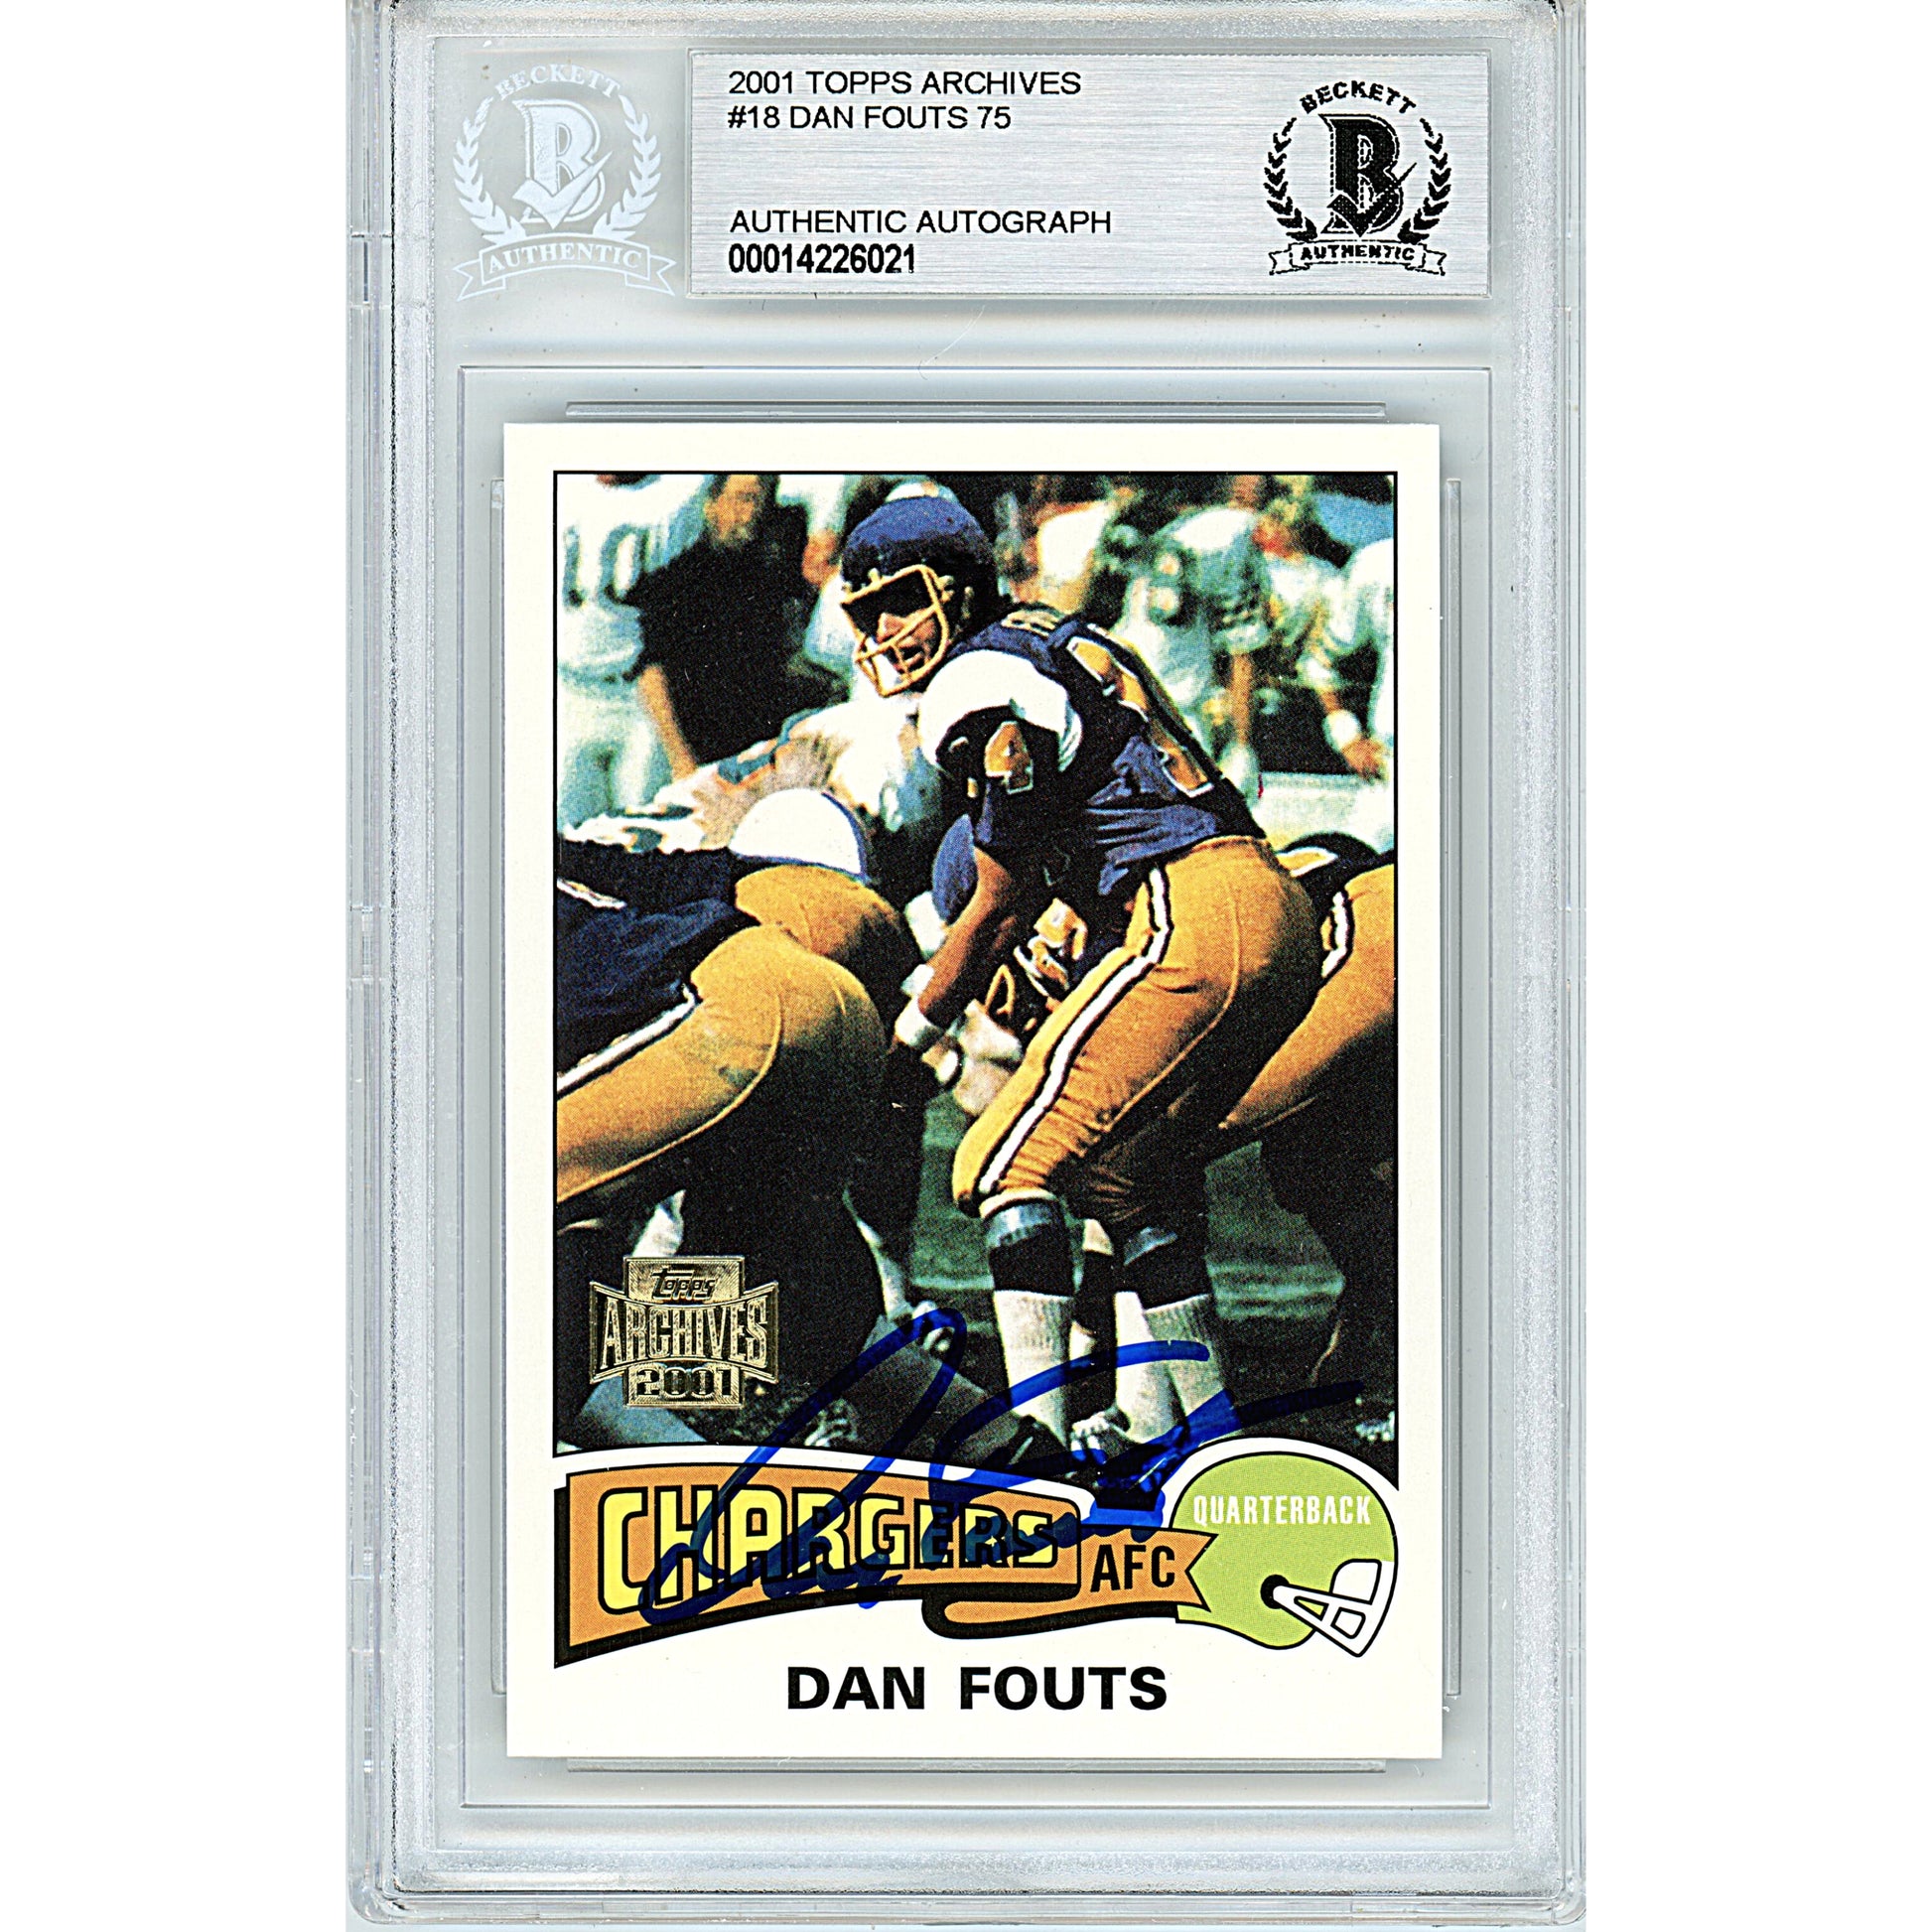 Footballs- Autographed- Dan Fouts Signed San Diego Chargers 2001 Topps Archives Football Card Beckett BAS Slabbed 00014226021 - 101